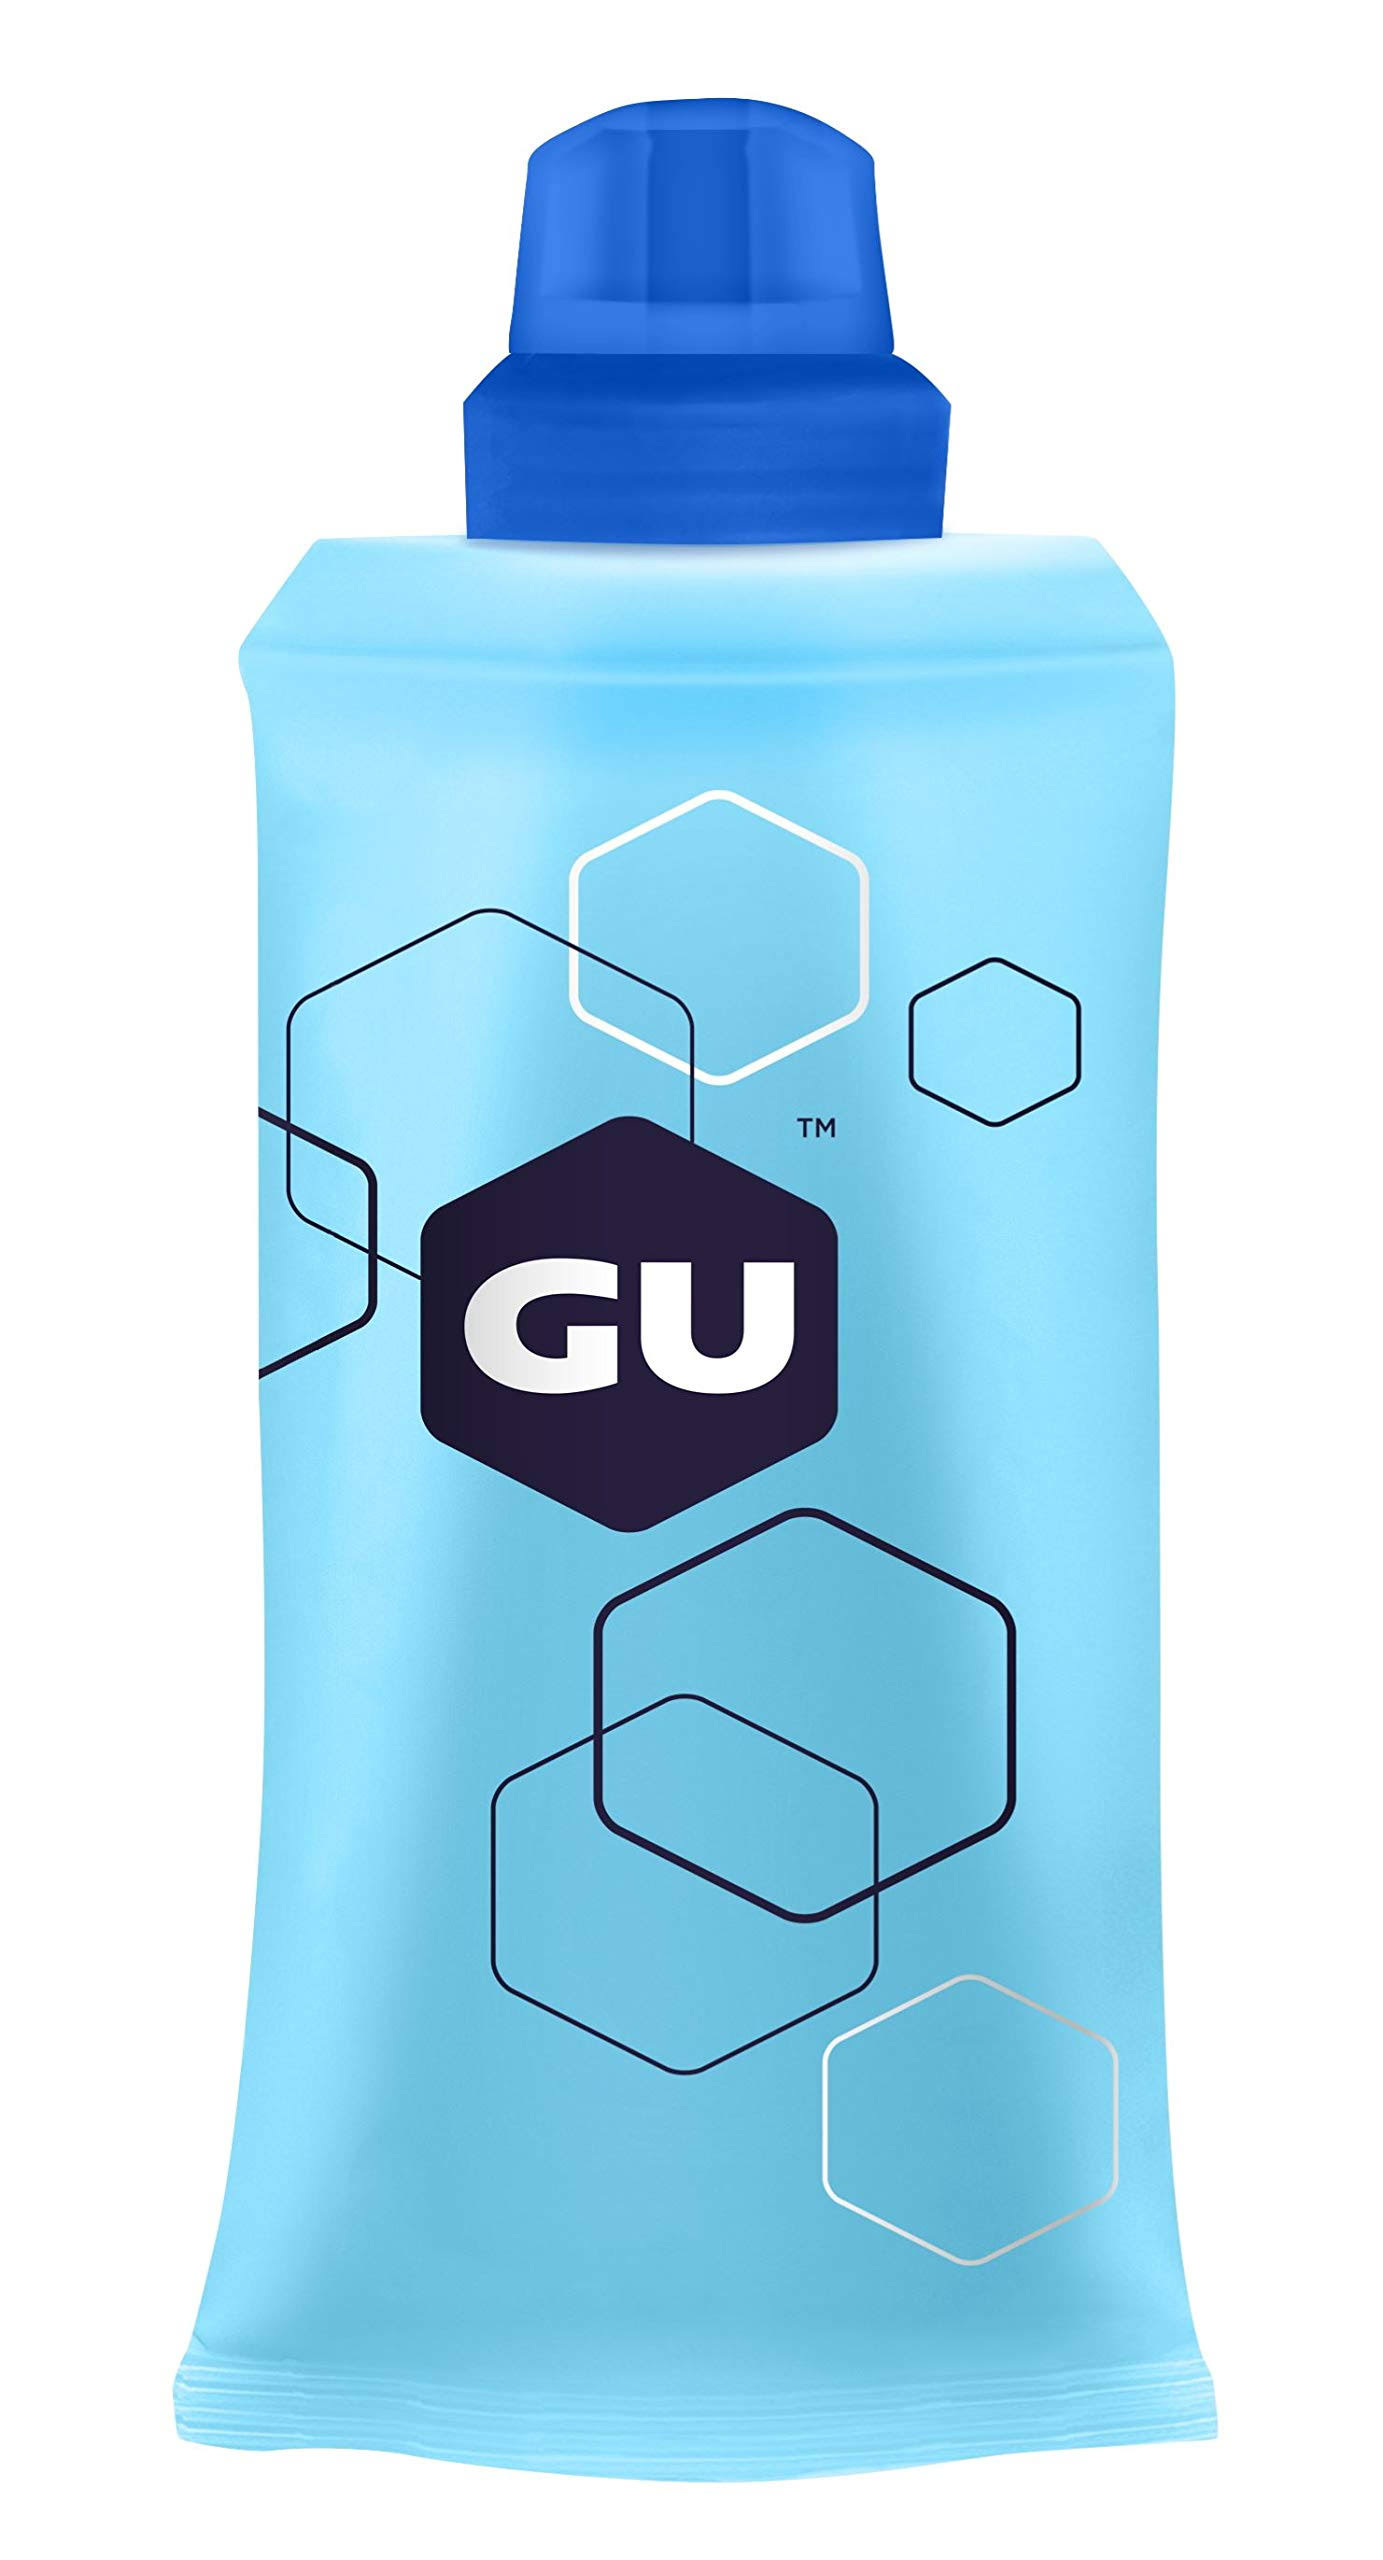 GU Energy Labs Refillable Flask for Sports Nutrition Energy Gel - 5.5oz